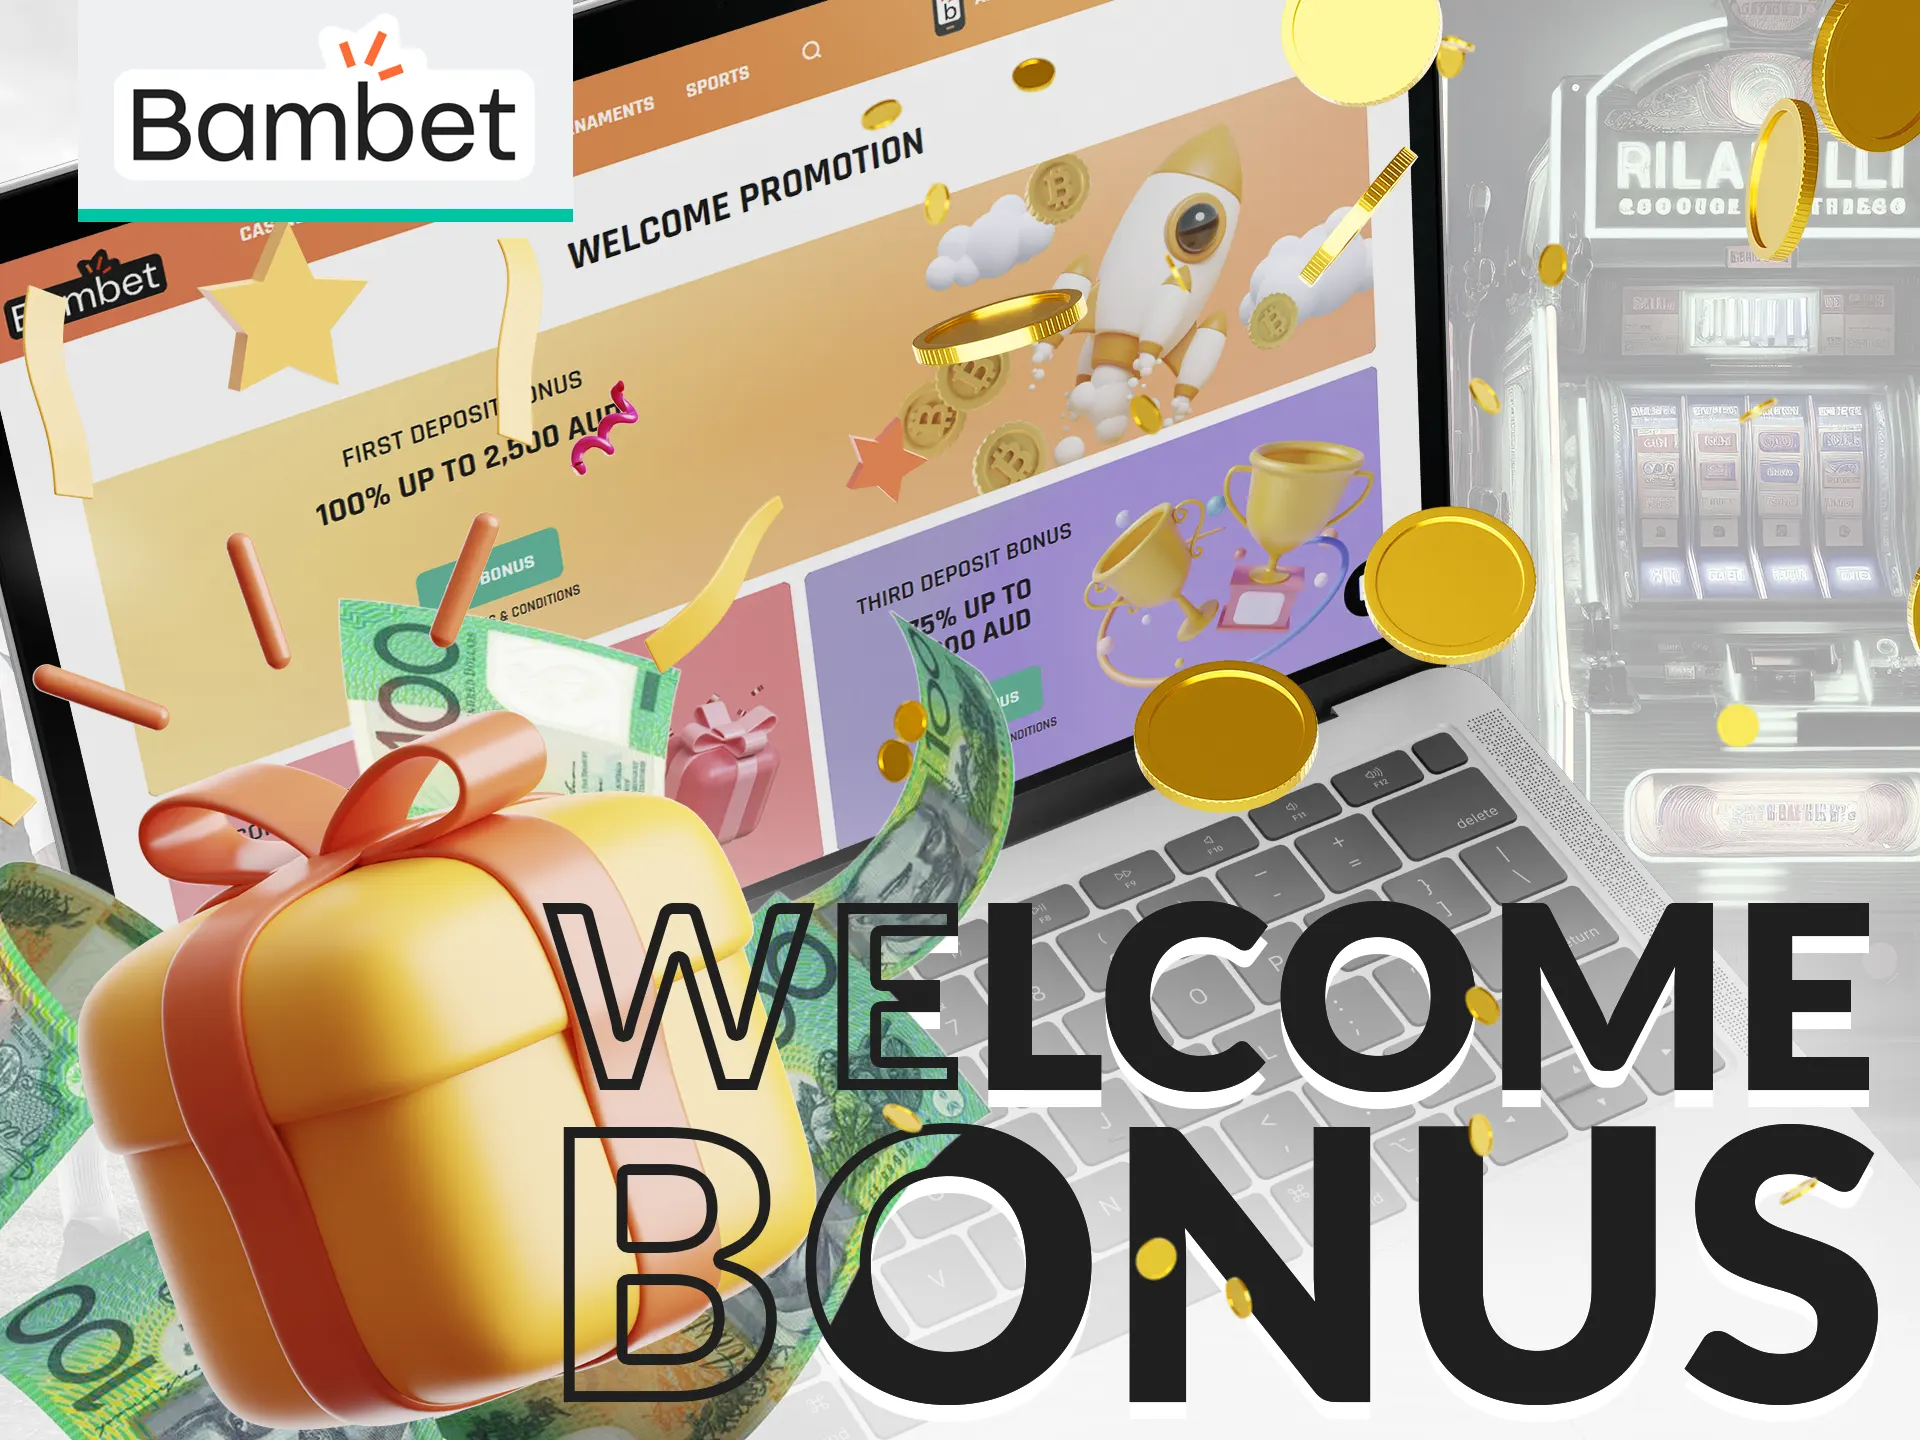 Bambet welcomes with up to $5,200 AUD bonus.